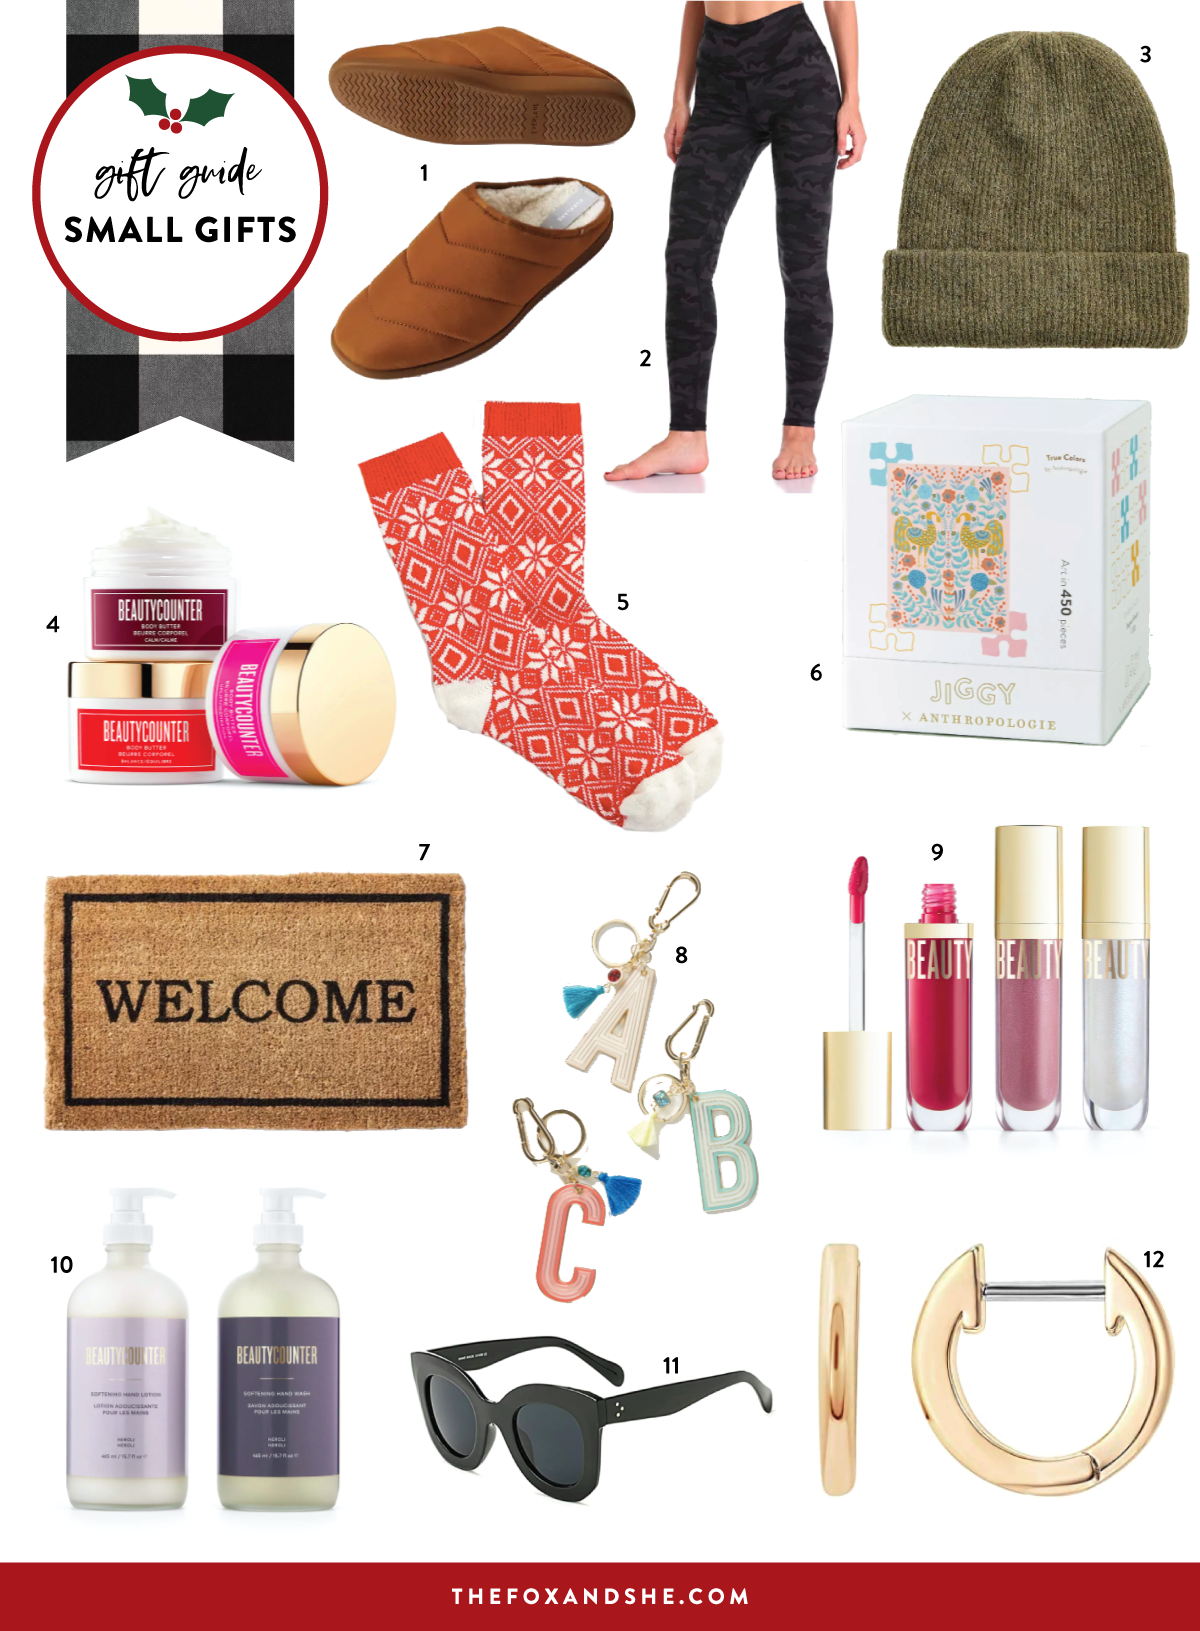 https://thefoxandshe.com/wp-content/uploads/2020/11/gift-guide-stocking-stuffers.png